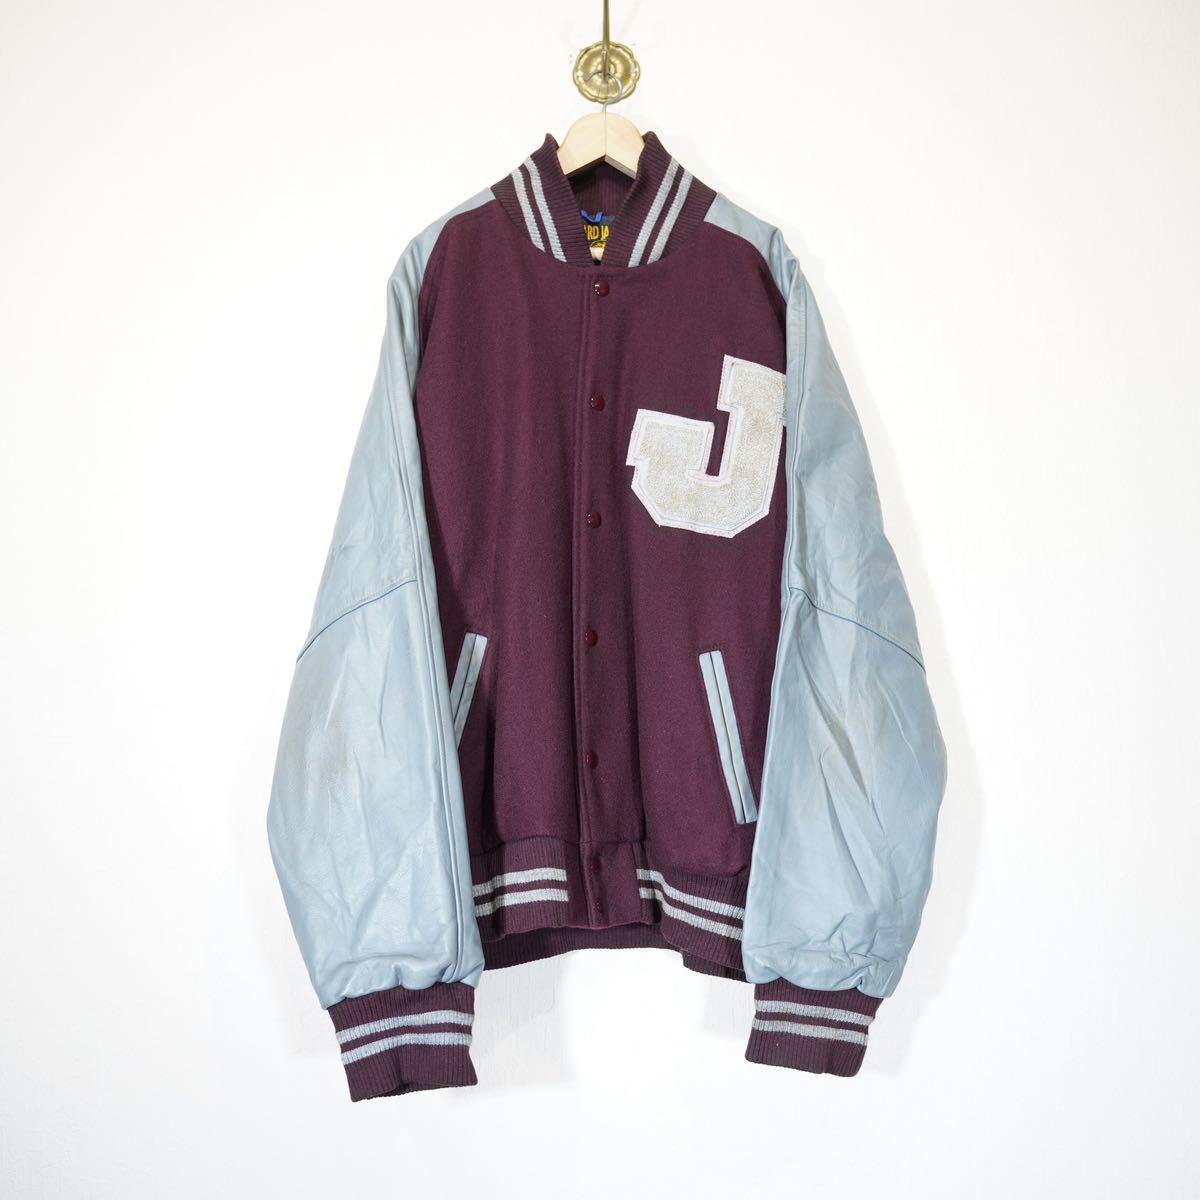 USA VINTAGE AWARD JACKET LETTERED LEATHER WOOL STADIUM JAMPER/アメリカ古着レタードレザーウールスタジャン